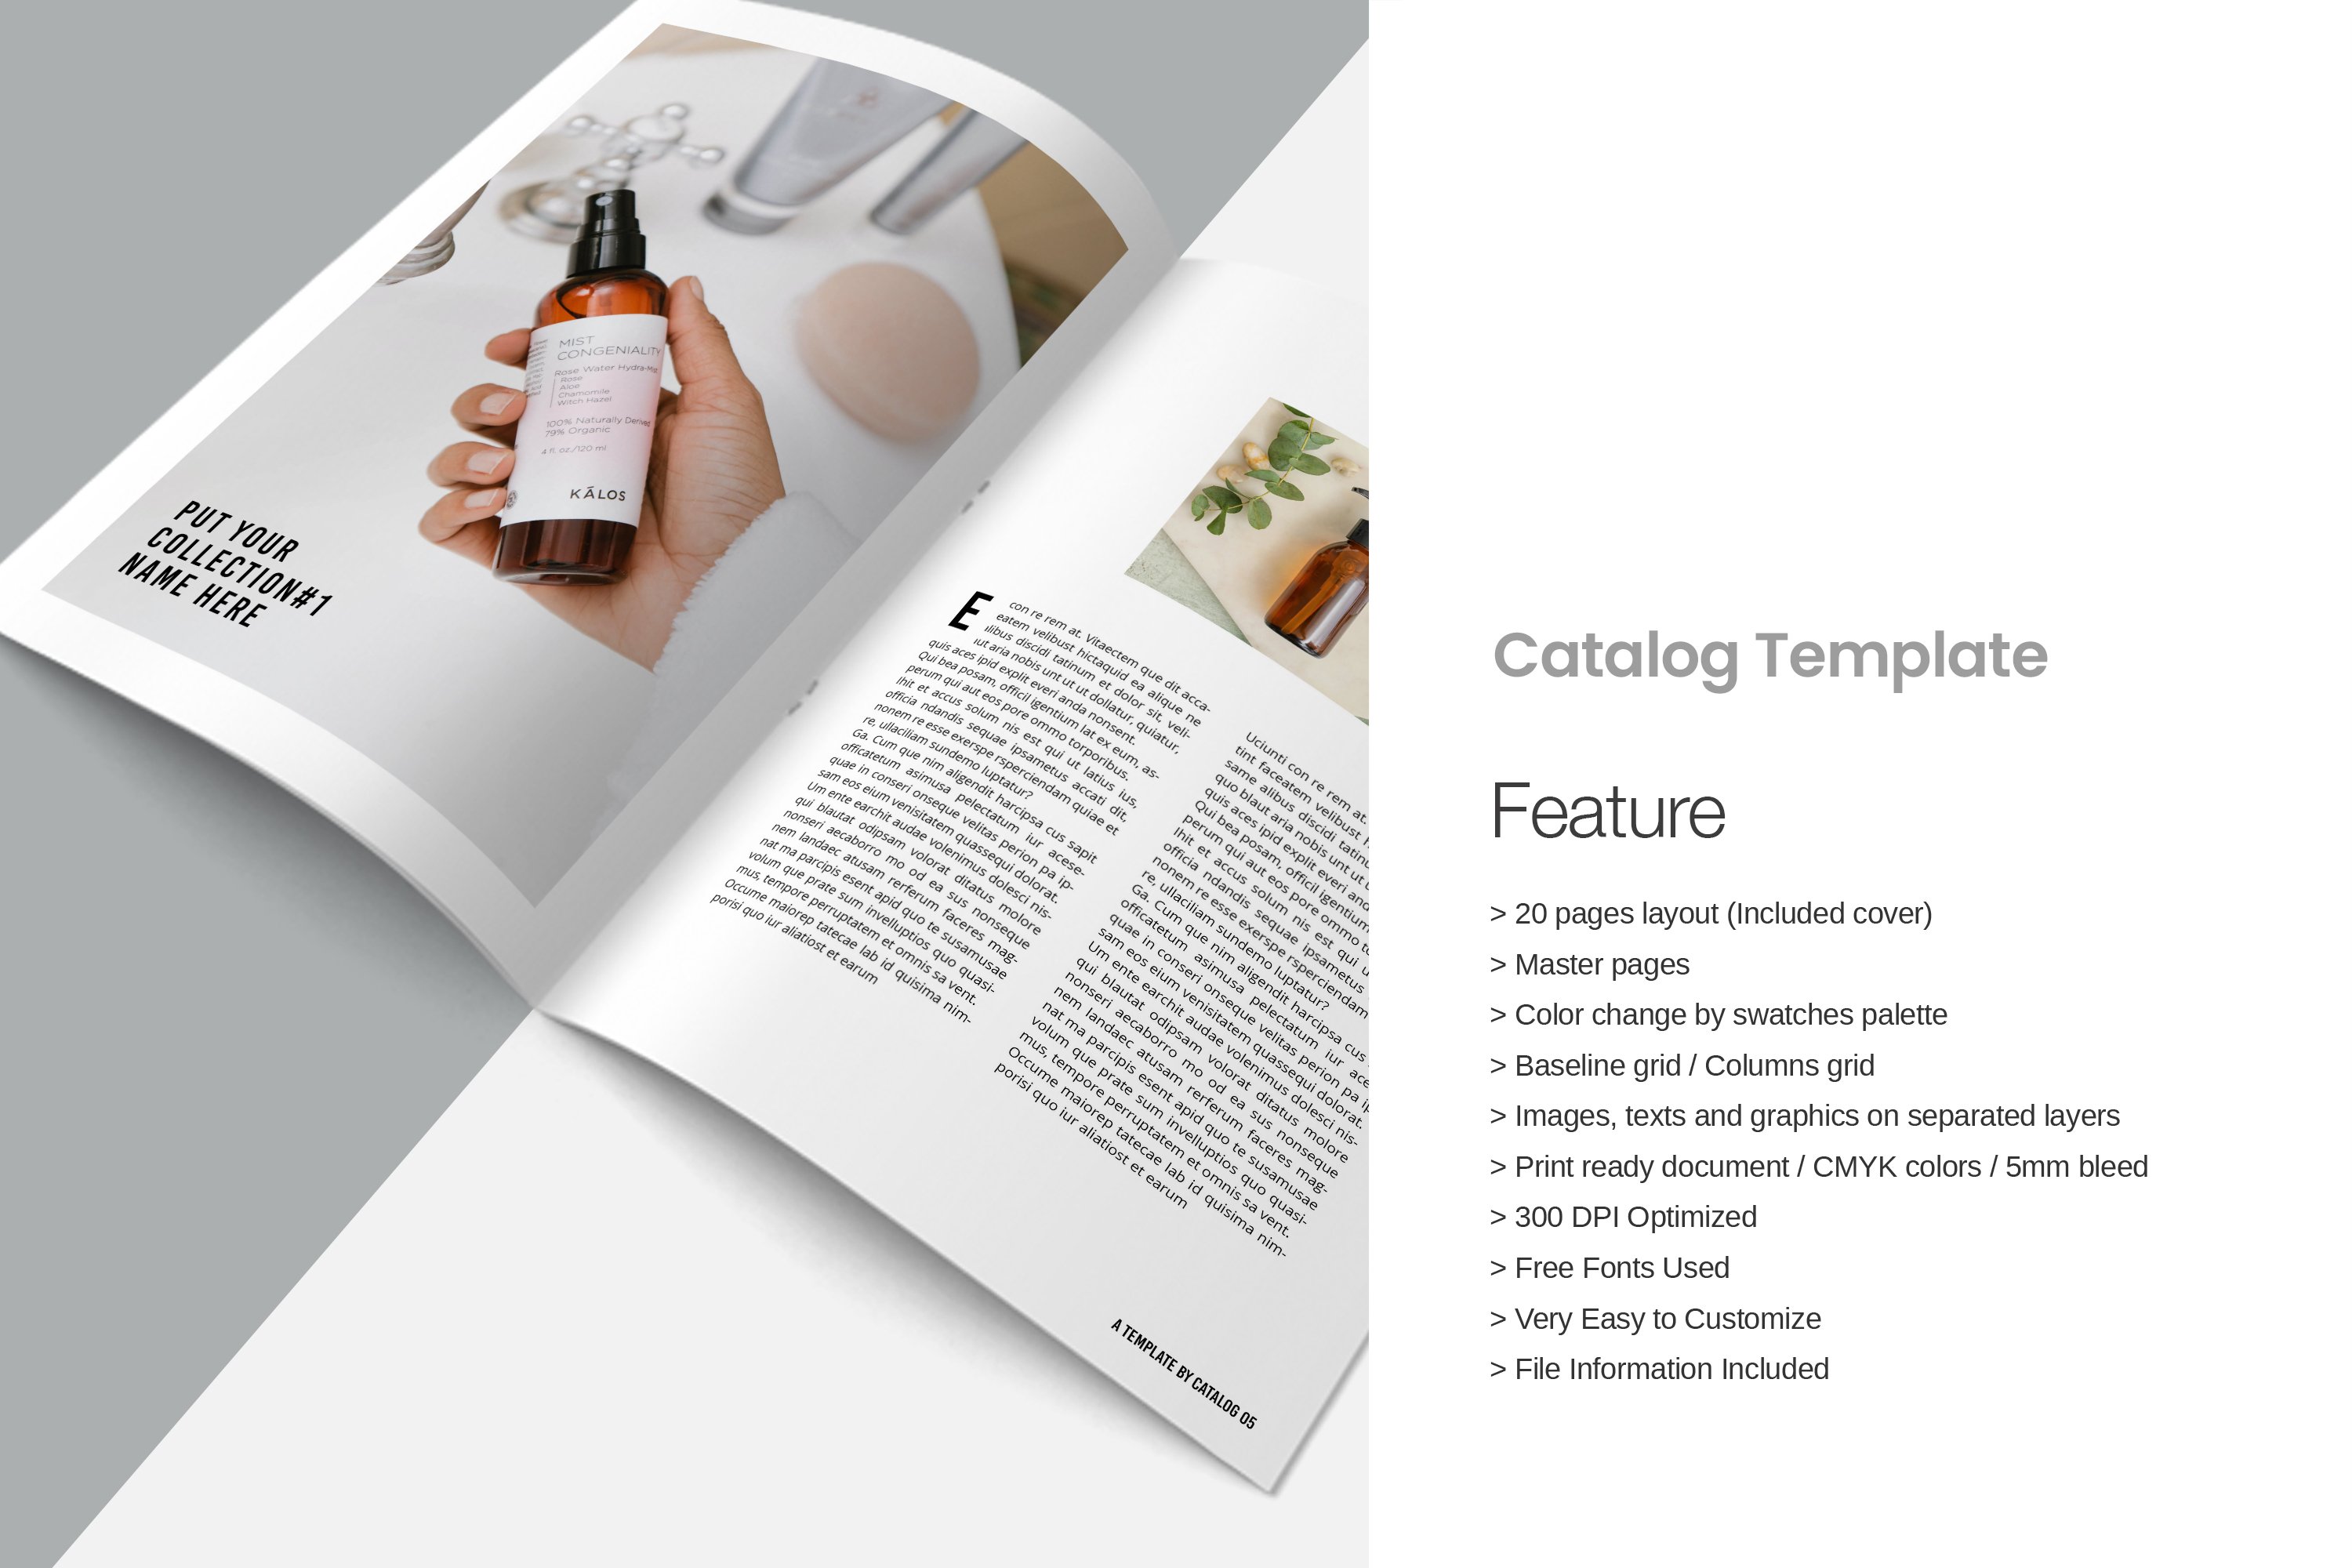 Catalog Template preview image.